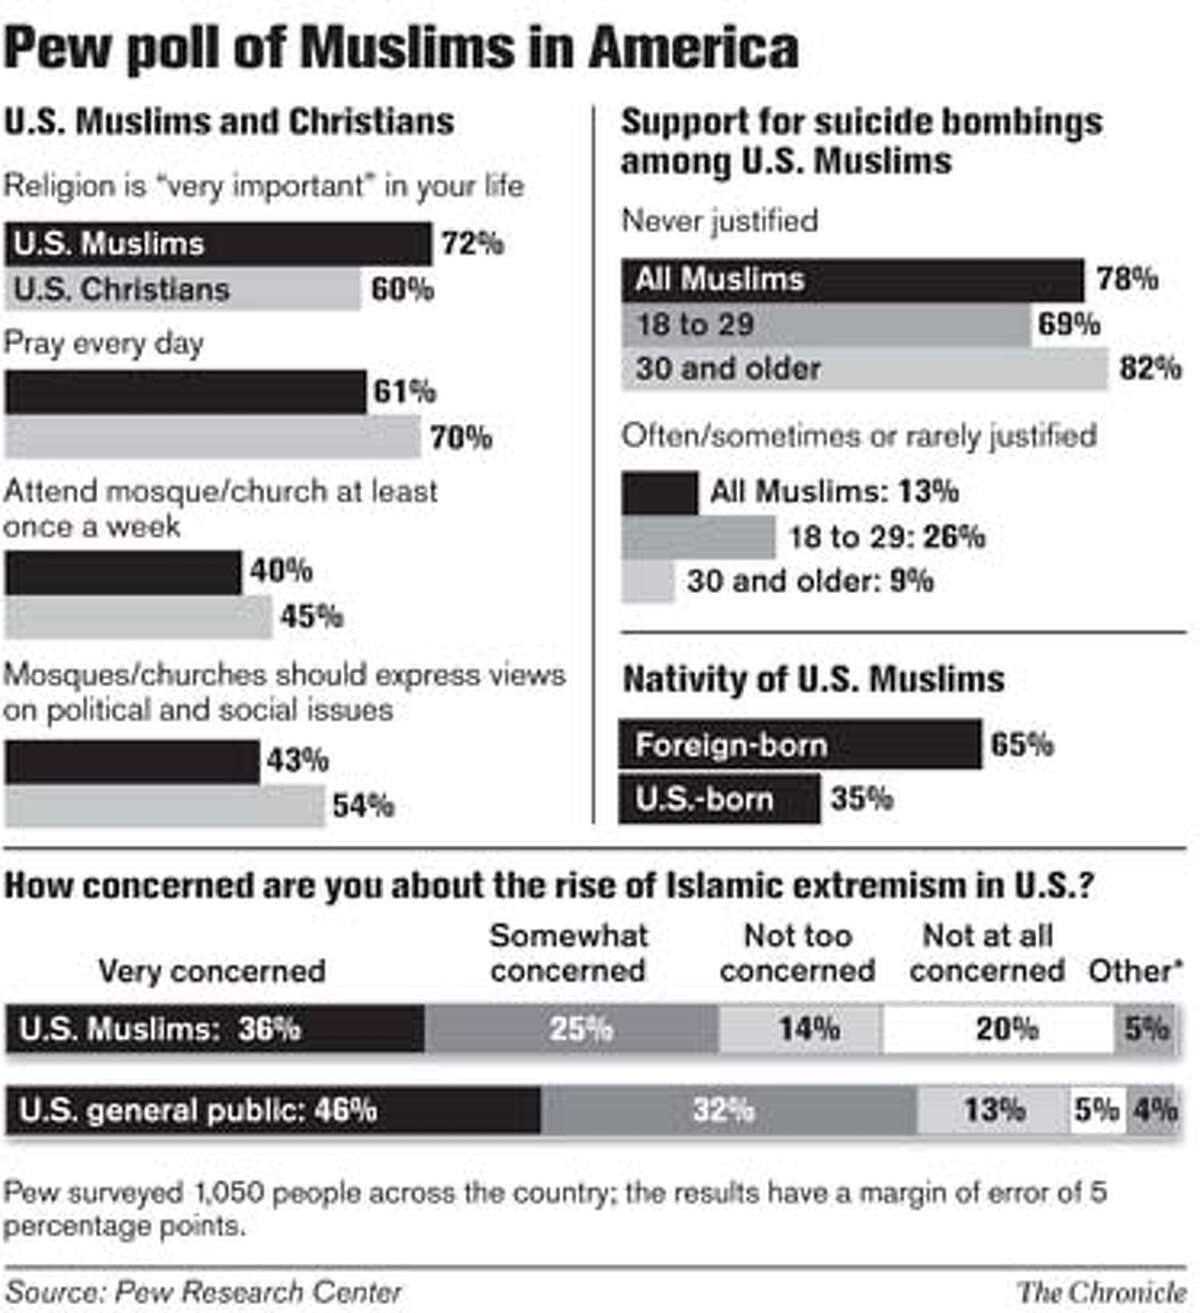 Pew Poll of Muslims in America. Chronicle Graphic